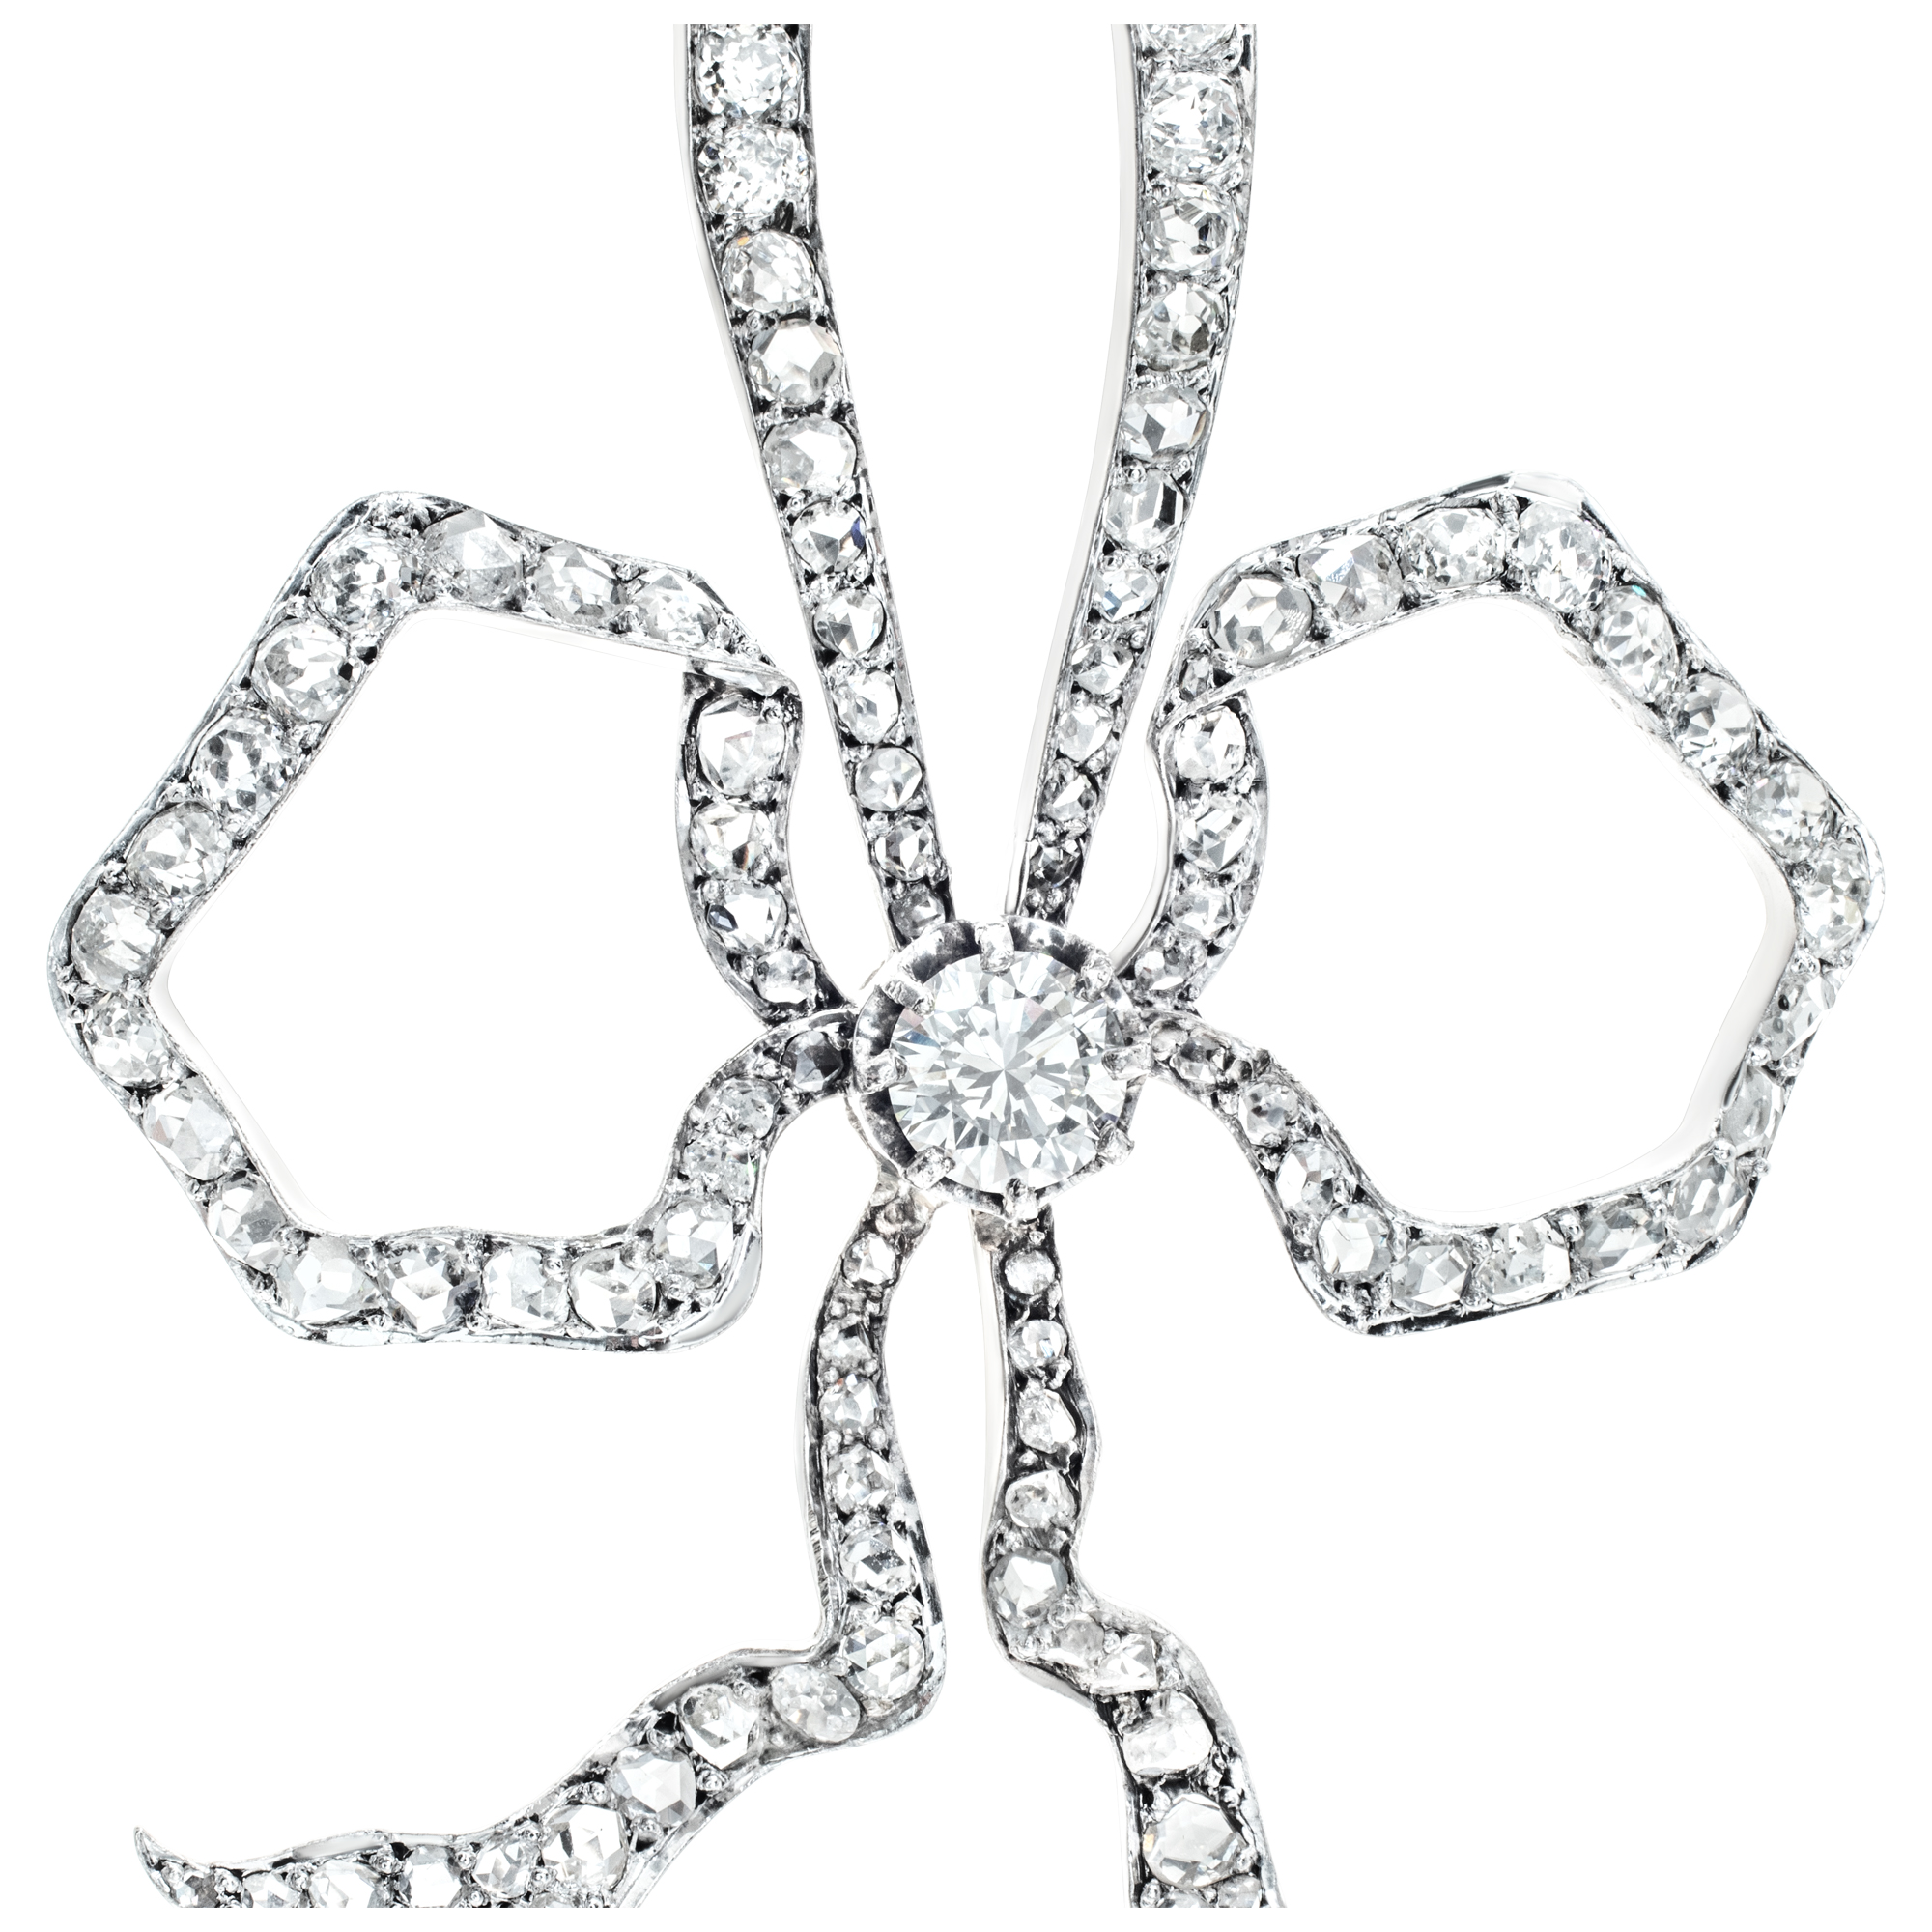 Diamond brooch in 18k white gold with 1 ct center rose cut diamond image 4